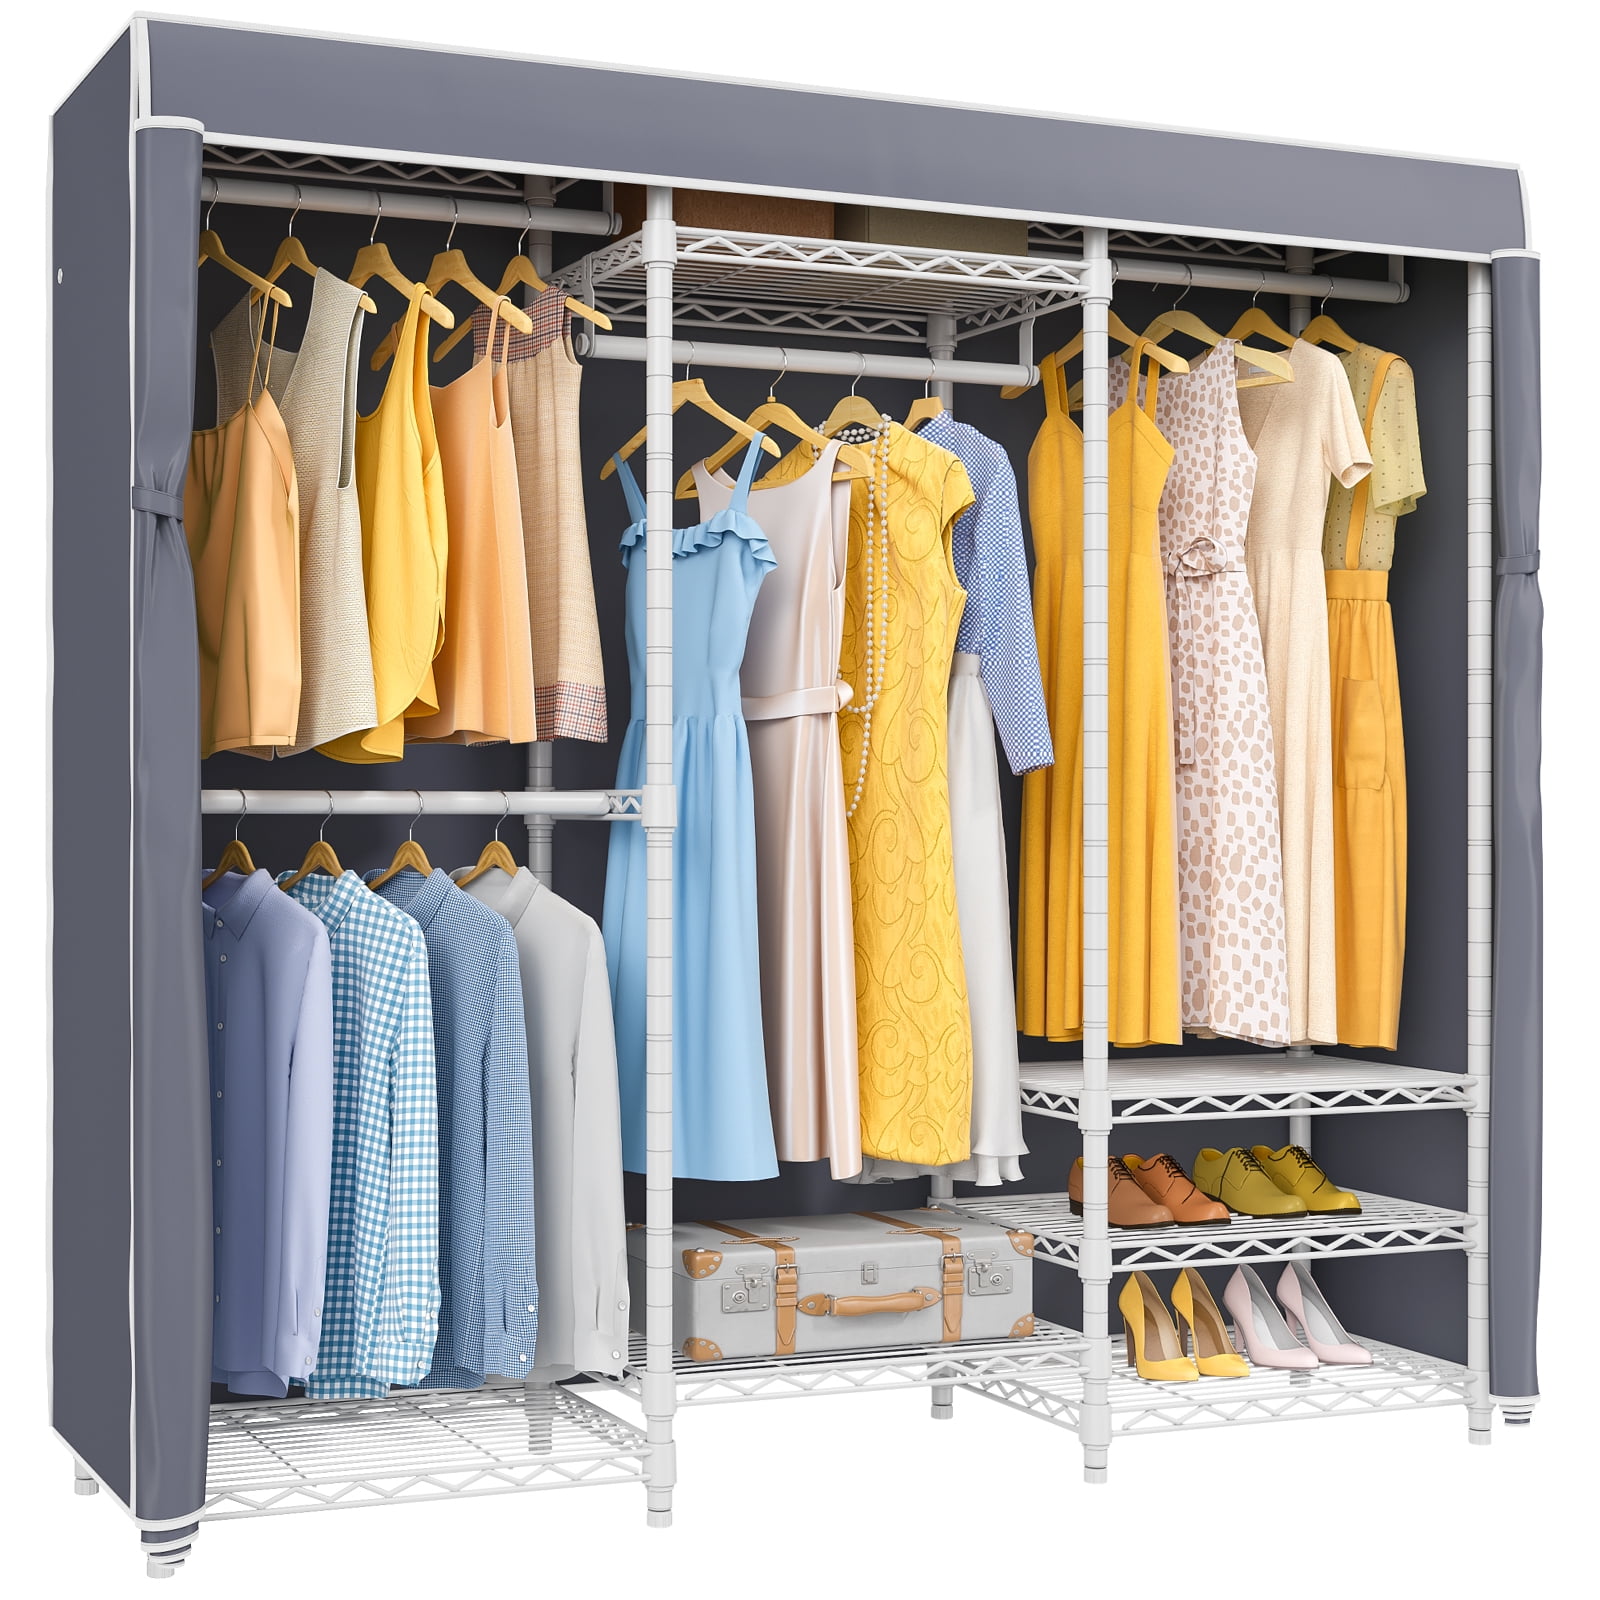 Zprotect Wardrobe Storage Organizer Portable Closet Clothes Rack Shelf for  Hanging Clothes with Non-Woven Fabric Cover and Side Pockets